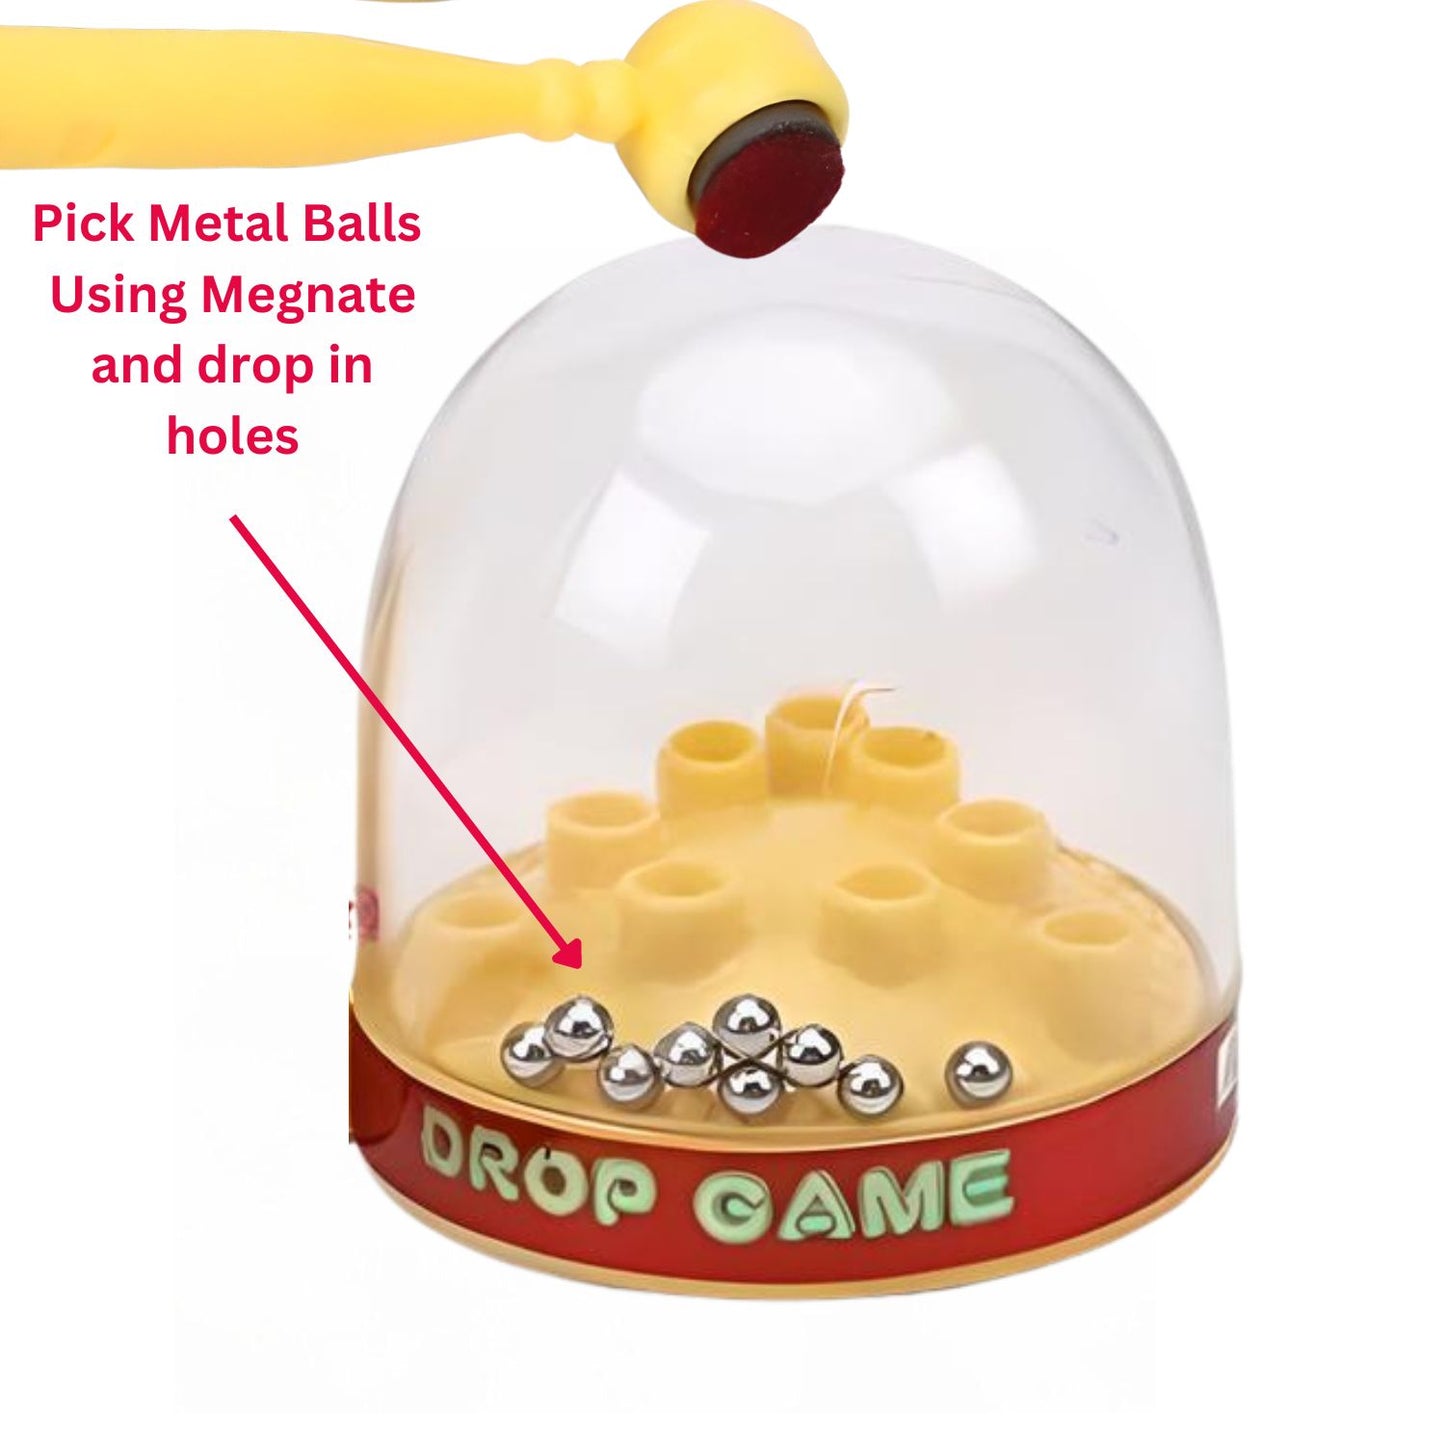 MM TOYS Magnetic Mini Drop Pocket Game: BIS Certified, Durable Plastic, Ideal for Skill Development, Vibrant Colors - Perfect Return Gift For 5+ Years